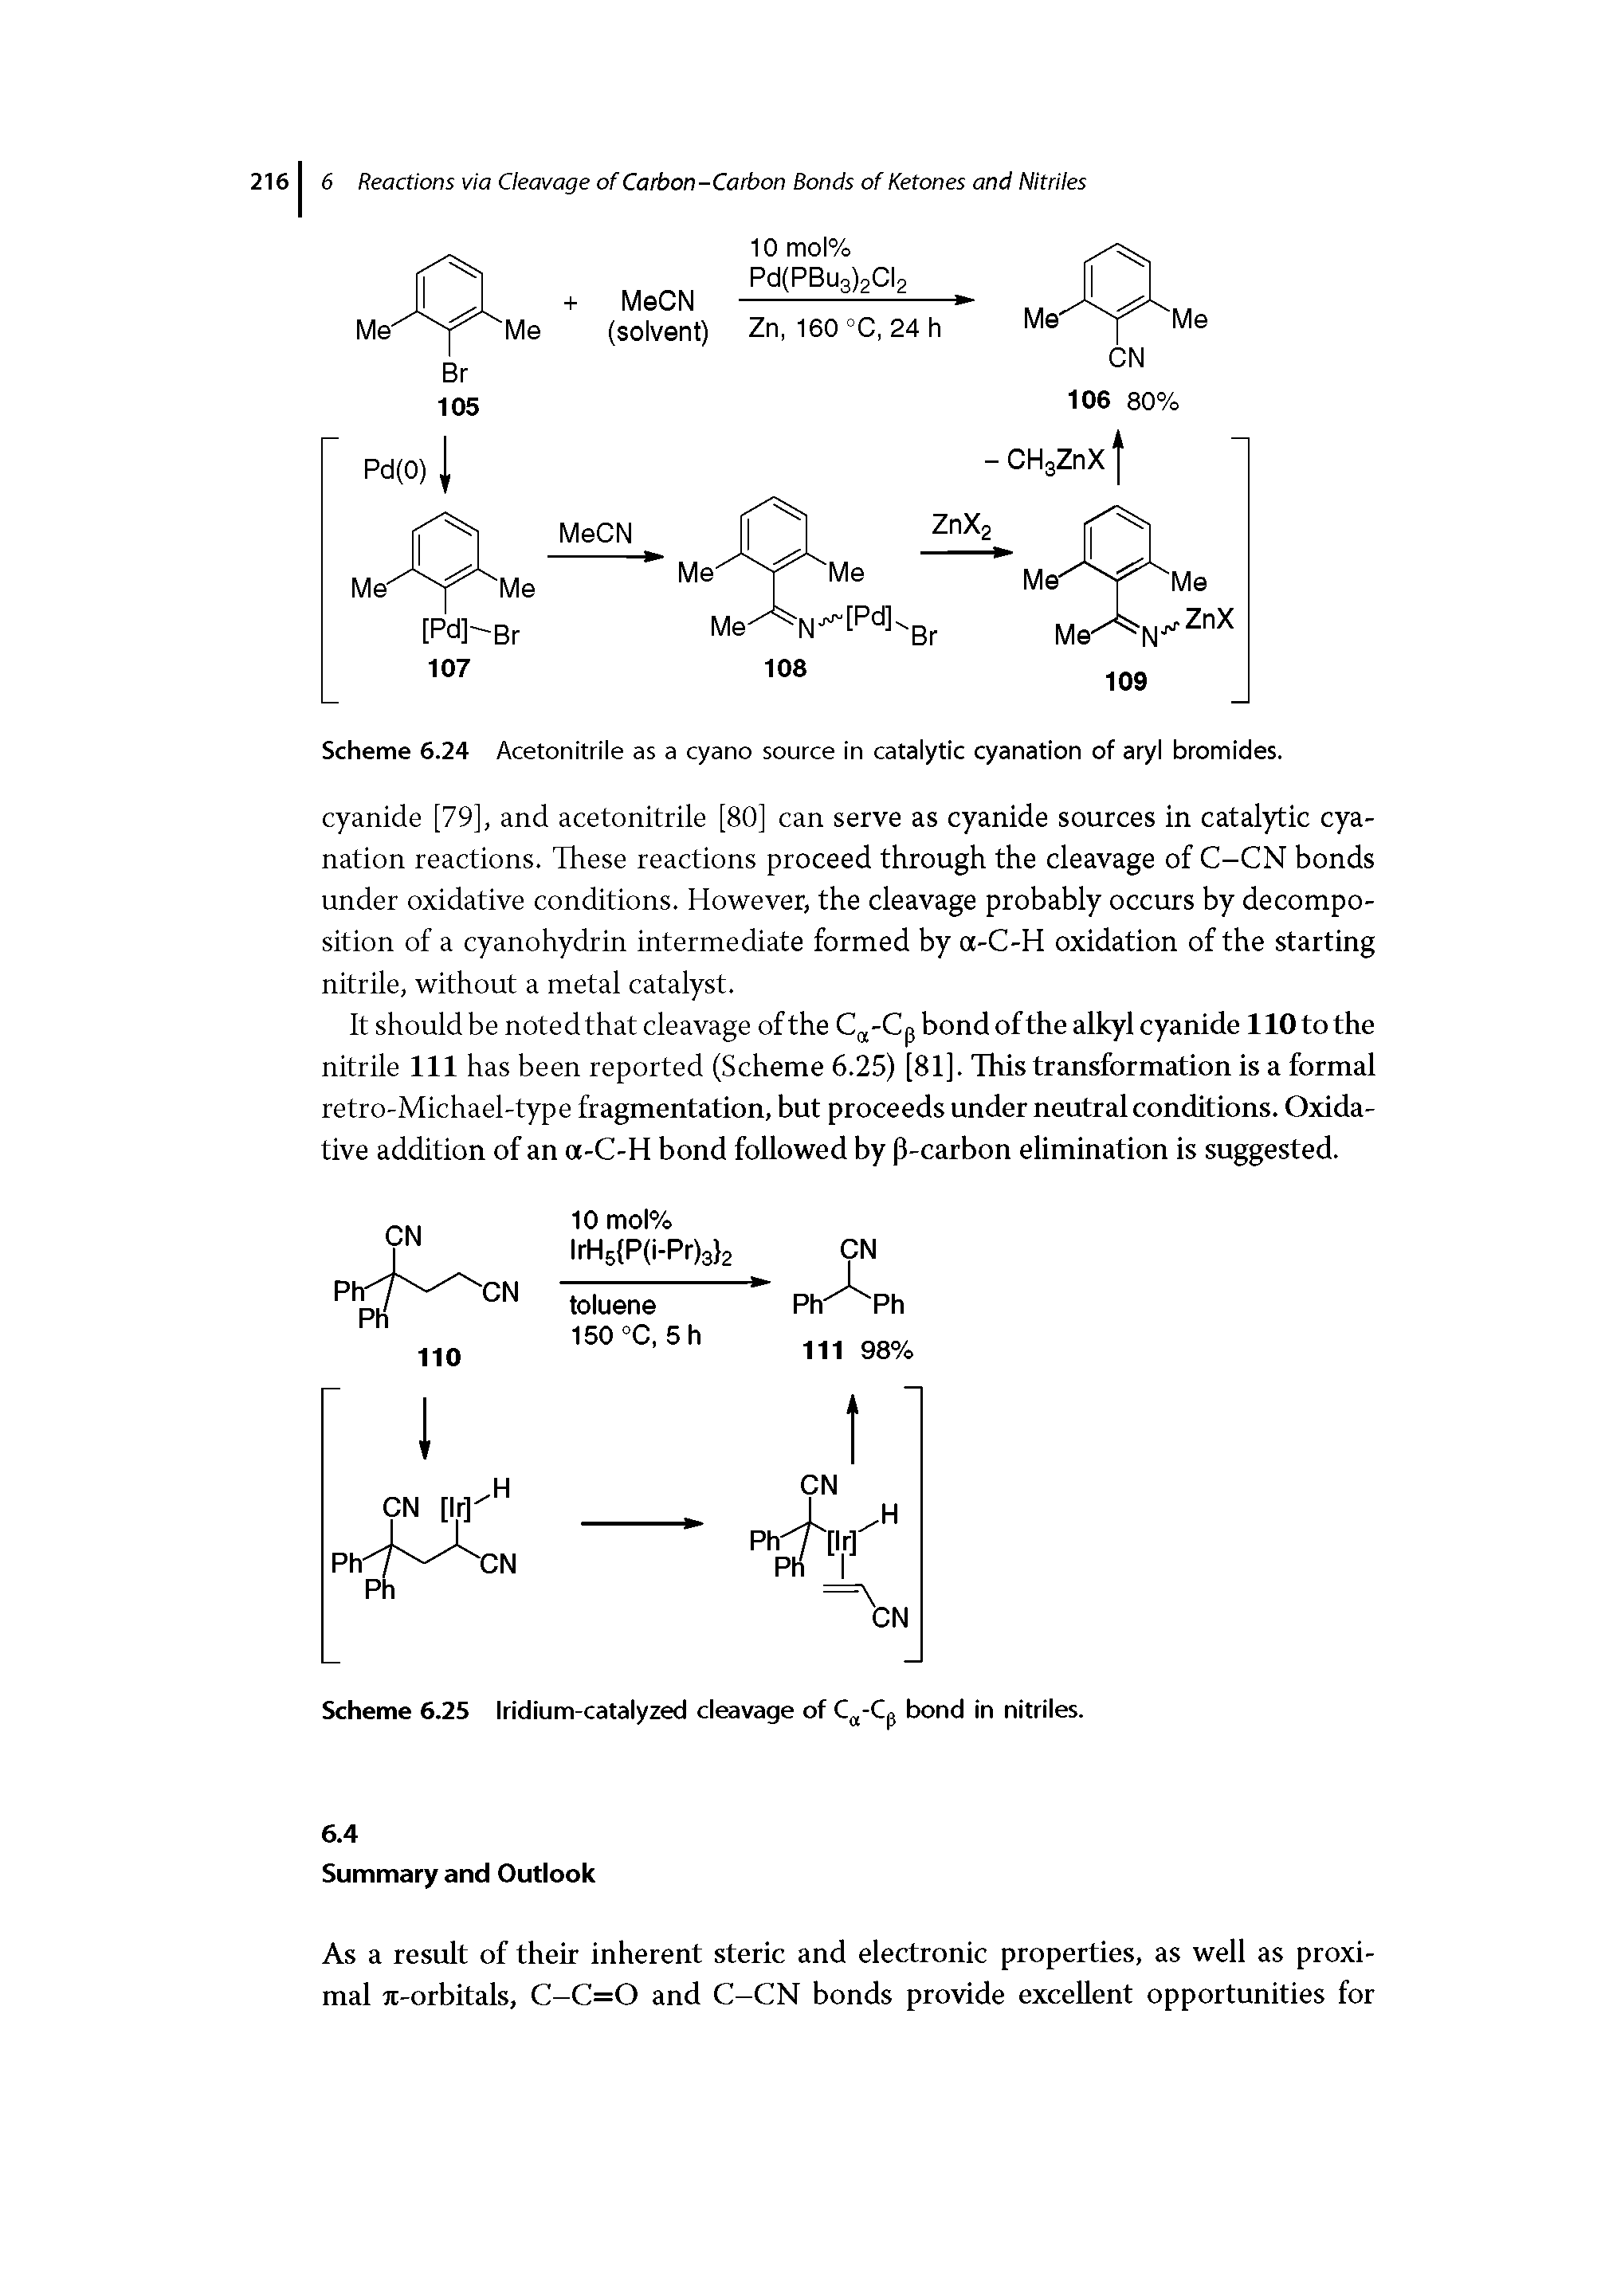 Scheme 6.24 Acetonitrile as a cyano source in catalytic cyanation of aryl bromides.